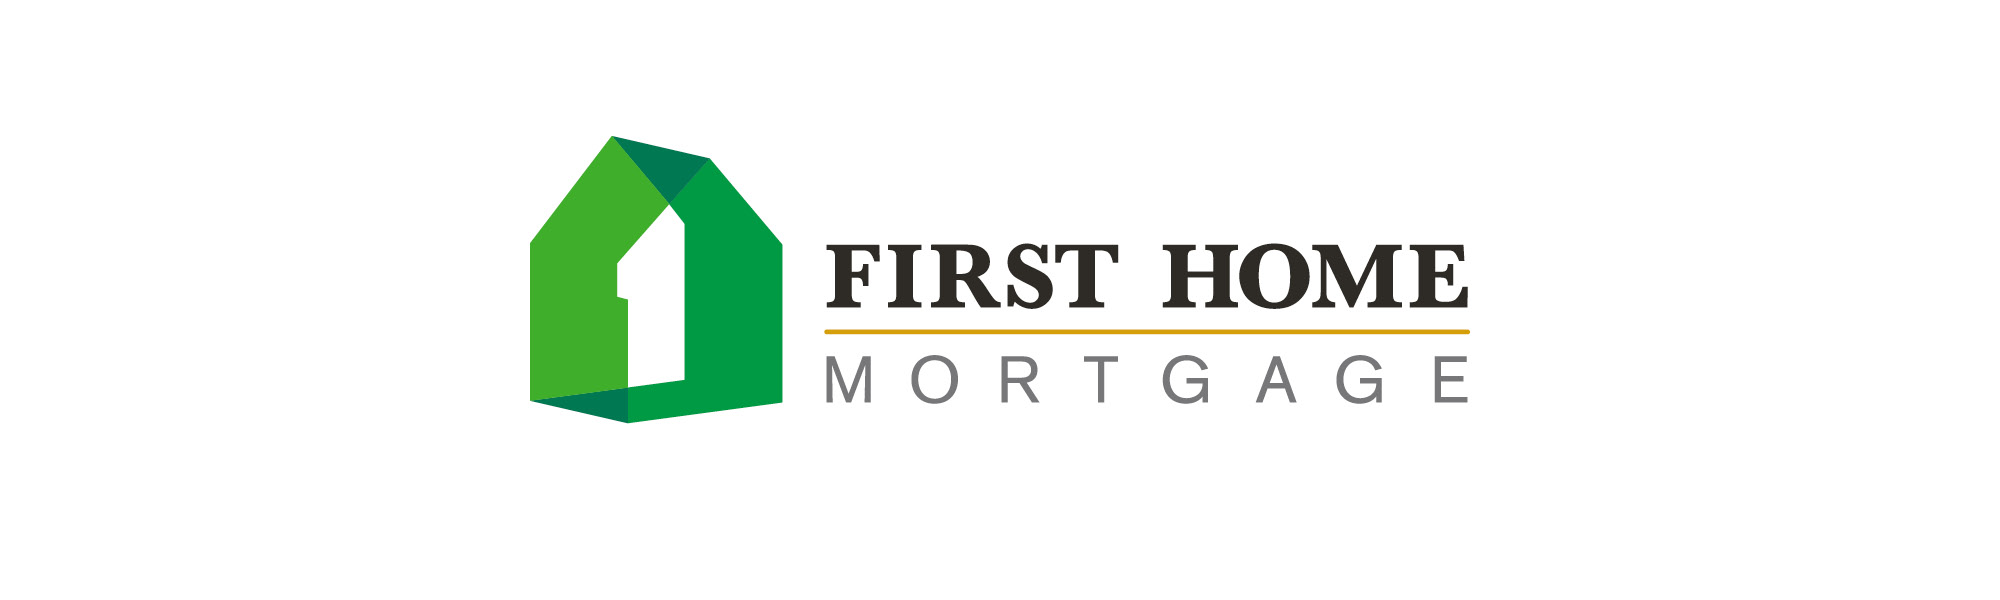 First Home Mortgage - Zachary Bill